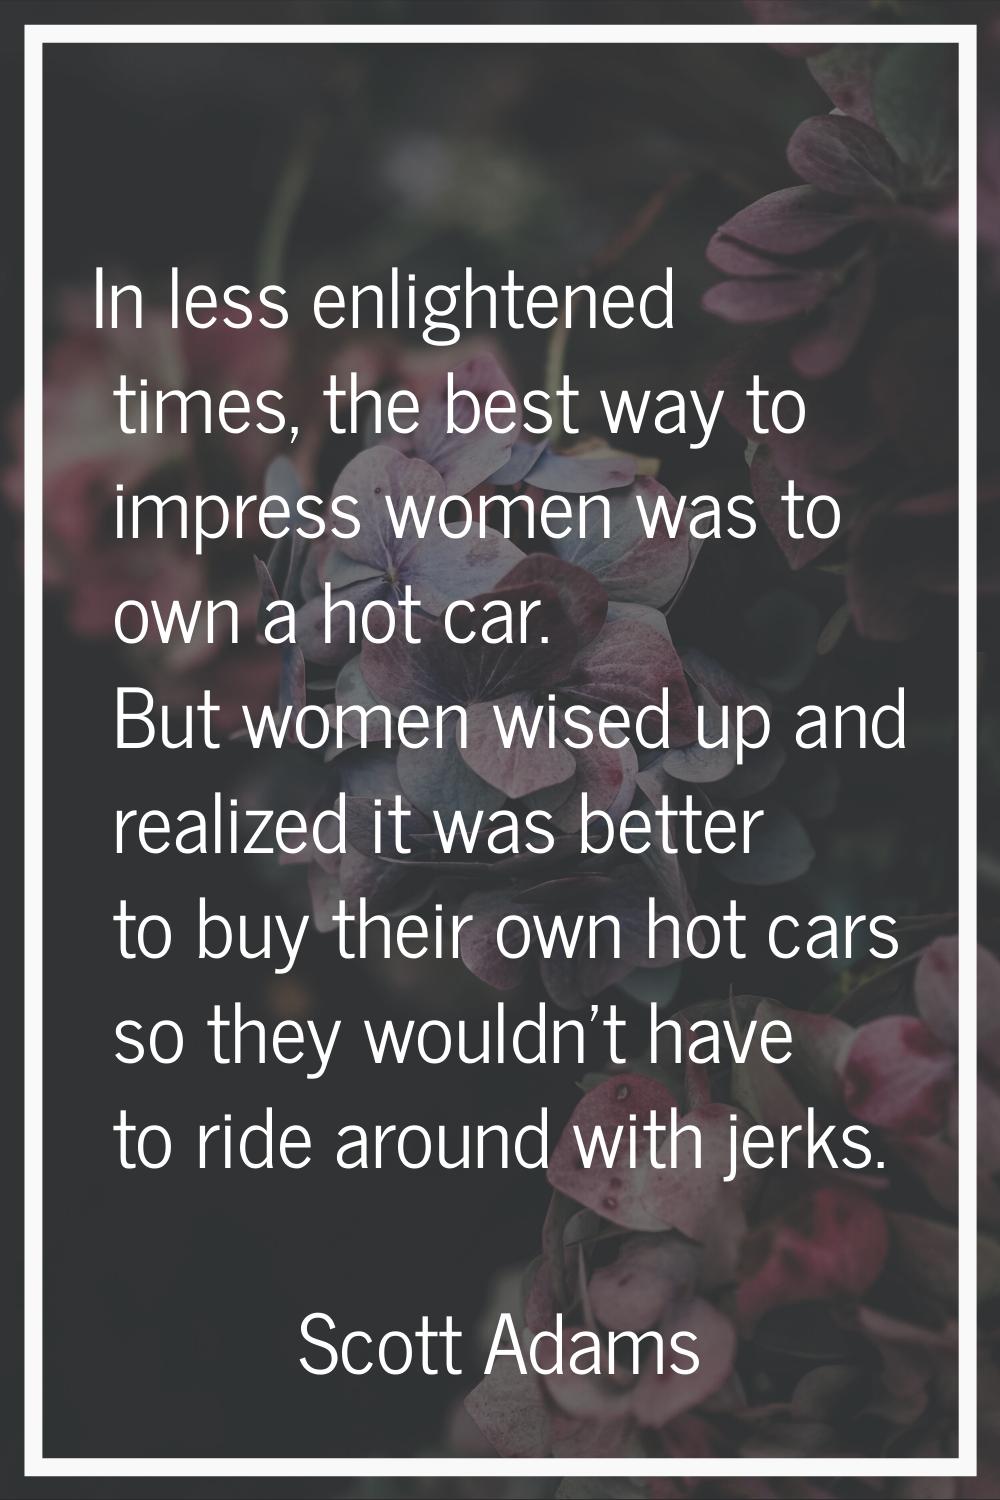 In less enlightened times, the best way to impress women was to own a hot car. But women wised up a